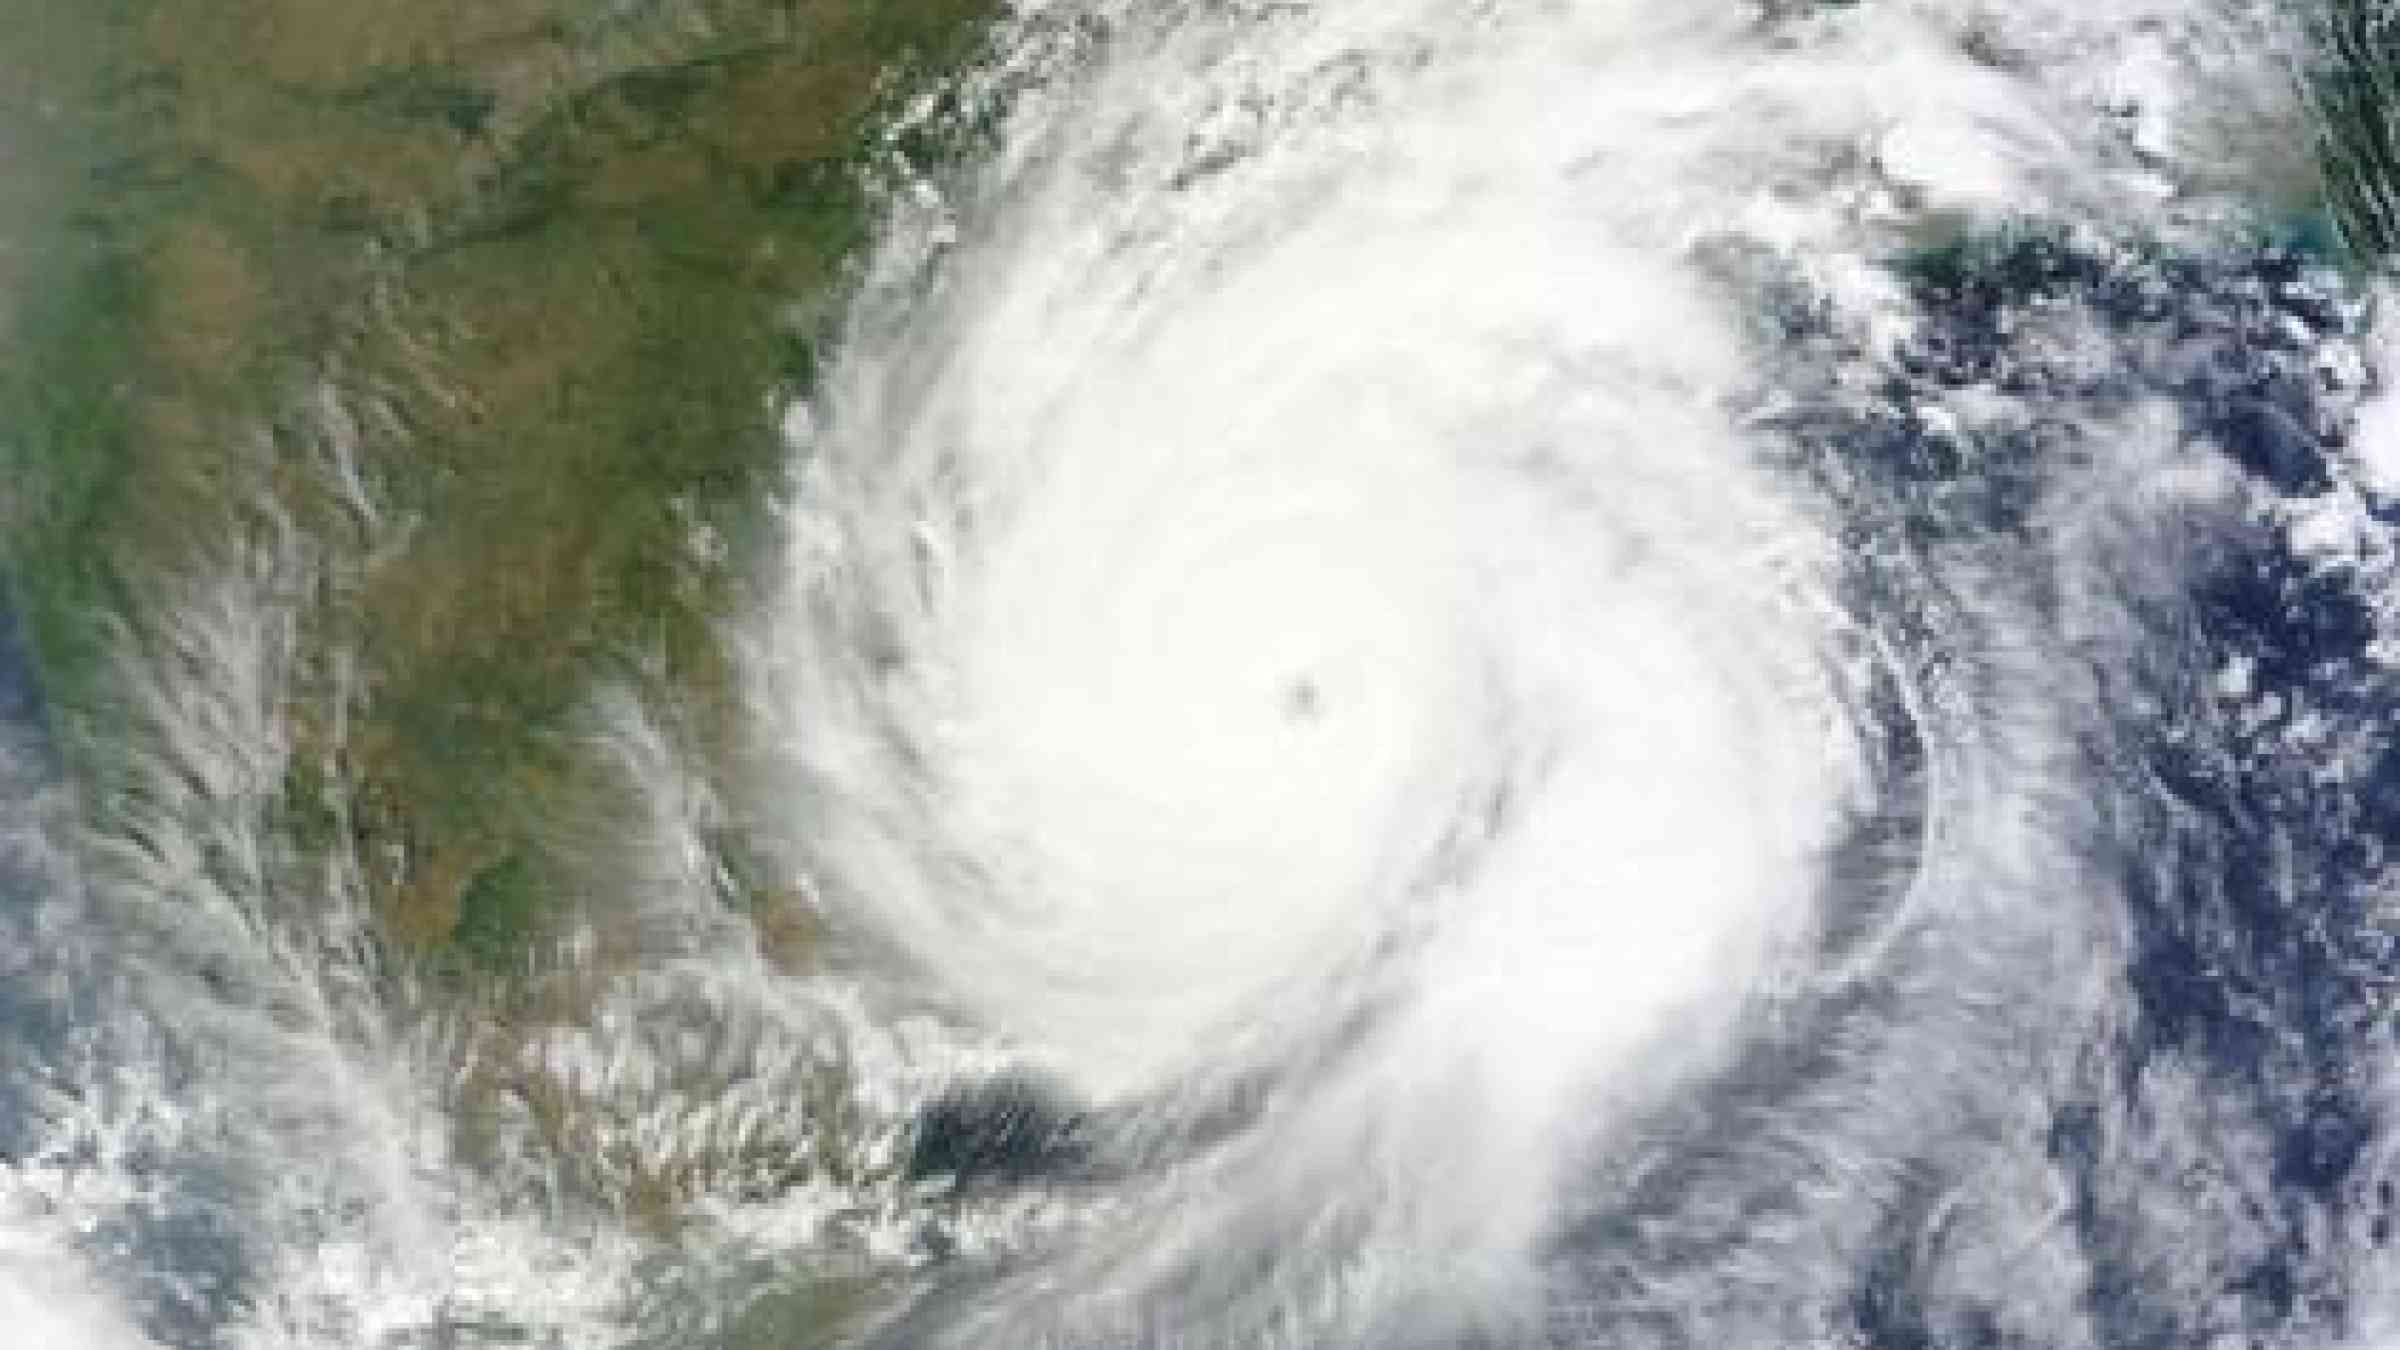 Cyclone Hudhud moving inland over the Indian east coast.